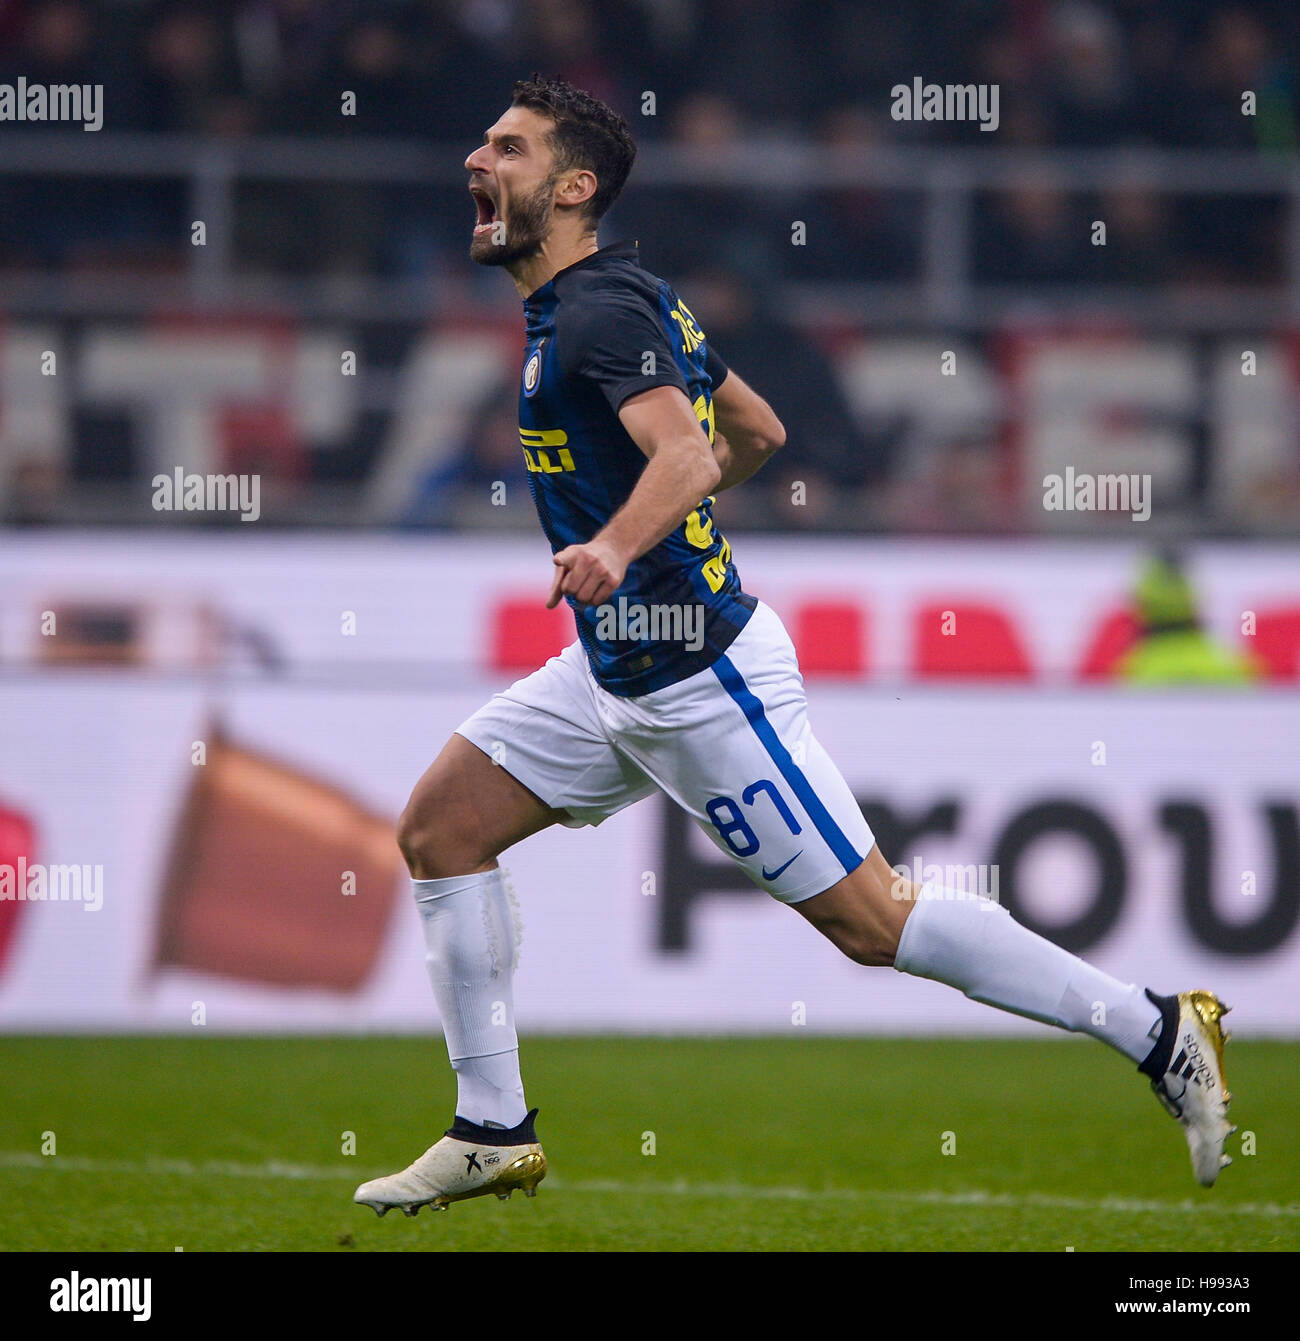 Milan, Italy. 20 november: Antonio Candreva of FC Internazionale celebrates after scoring a goal during the Serie A football match between AC Milan and FC Internazionale. Stock Photo